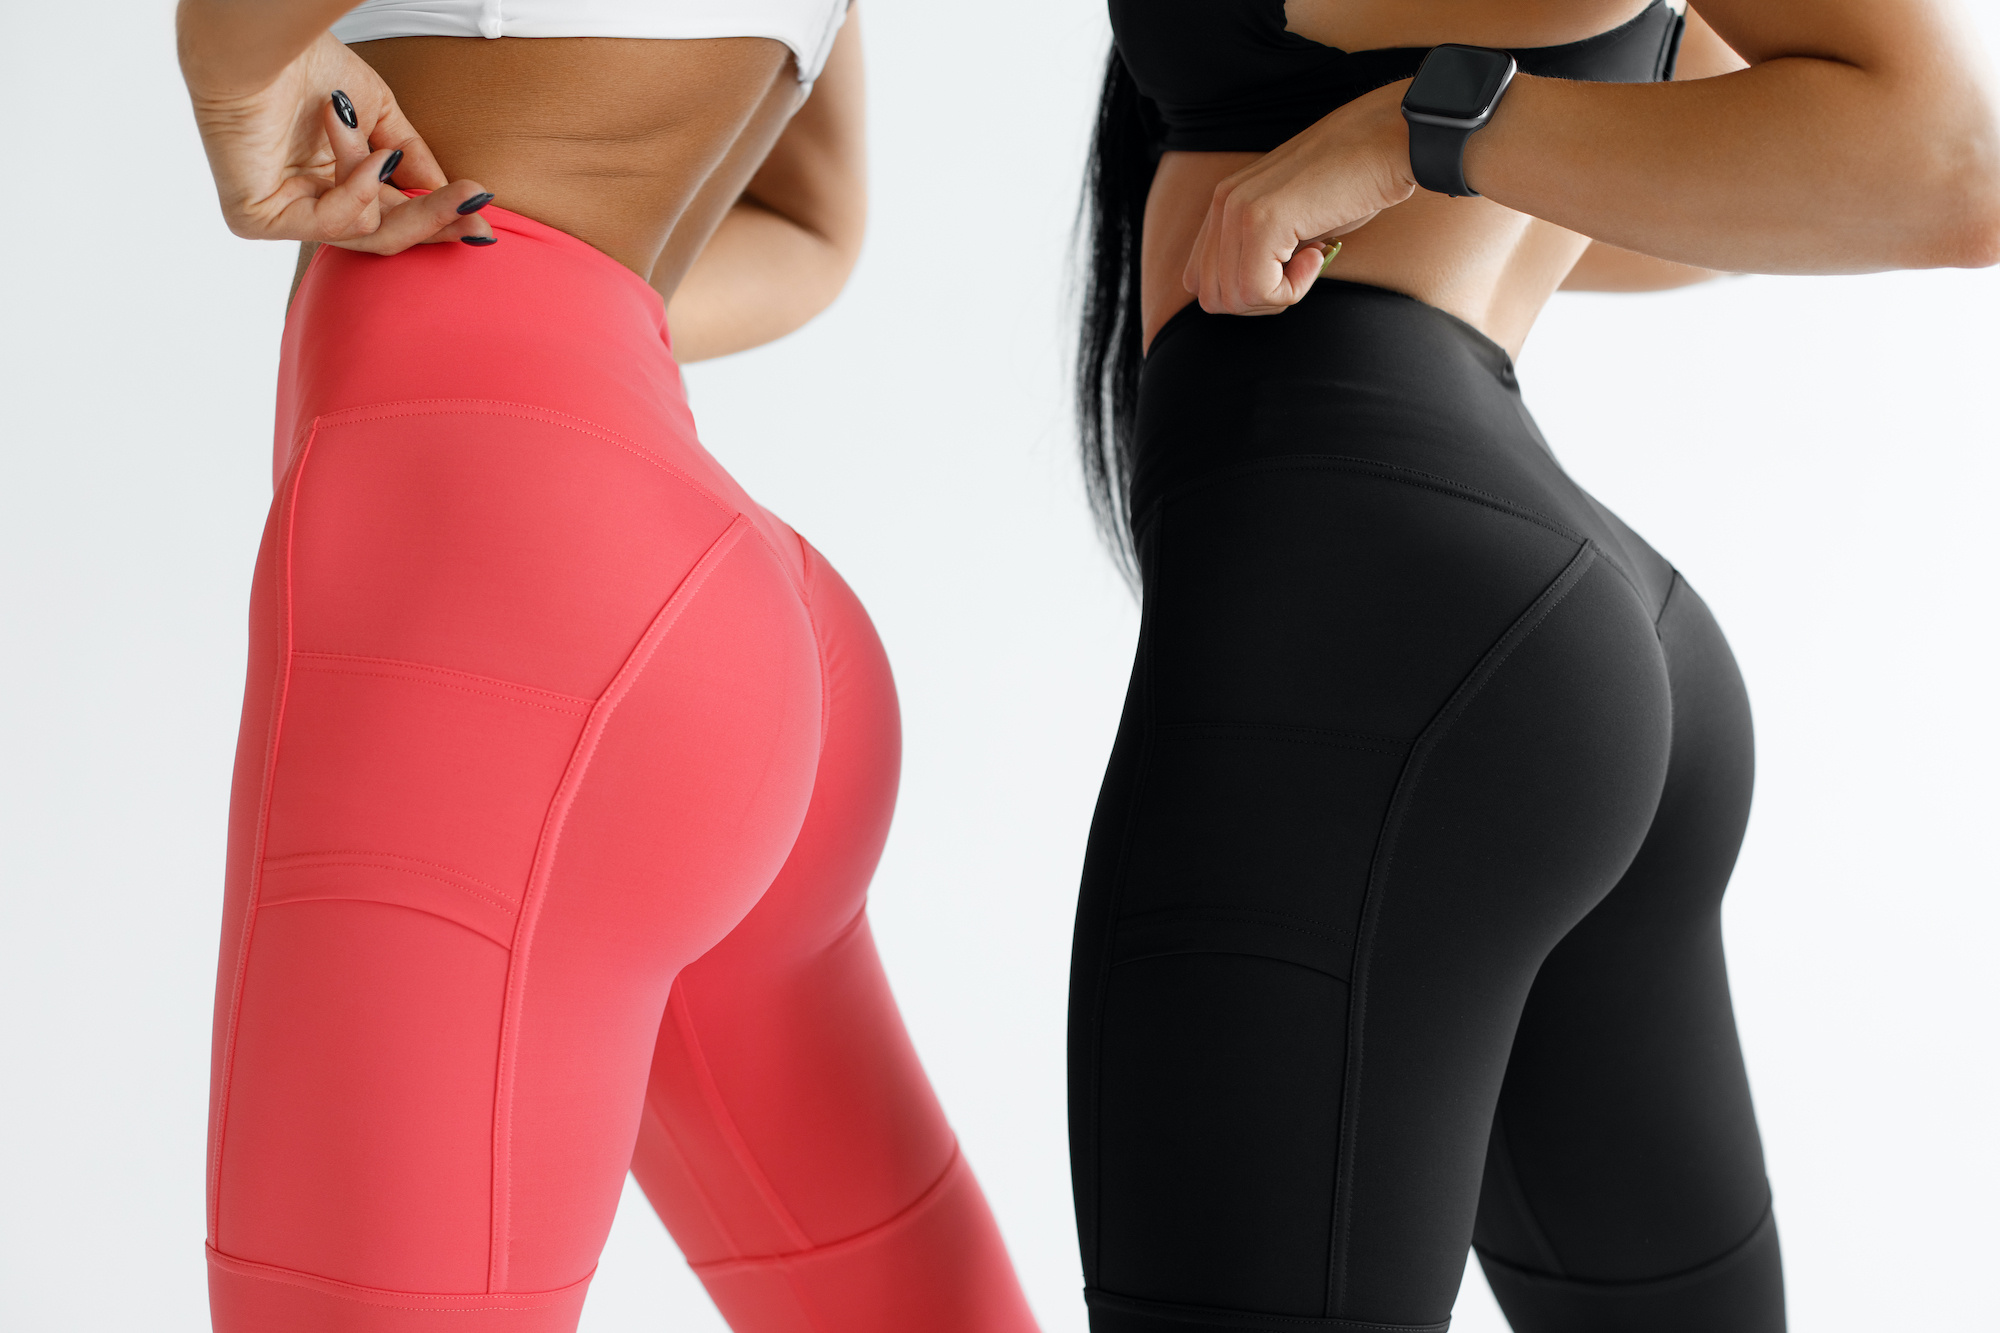 High Waist Seamless Leg Petite Gym Leggings For Women Thick, Sealed, And  Push Up Perfect For Fitness, Gym, Workouts, Scrunching, Booty, Or Push Up  Available In Sizes S XL From Zh_ch, $12.99 |